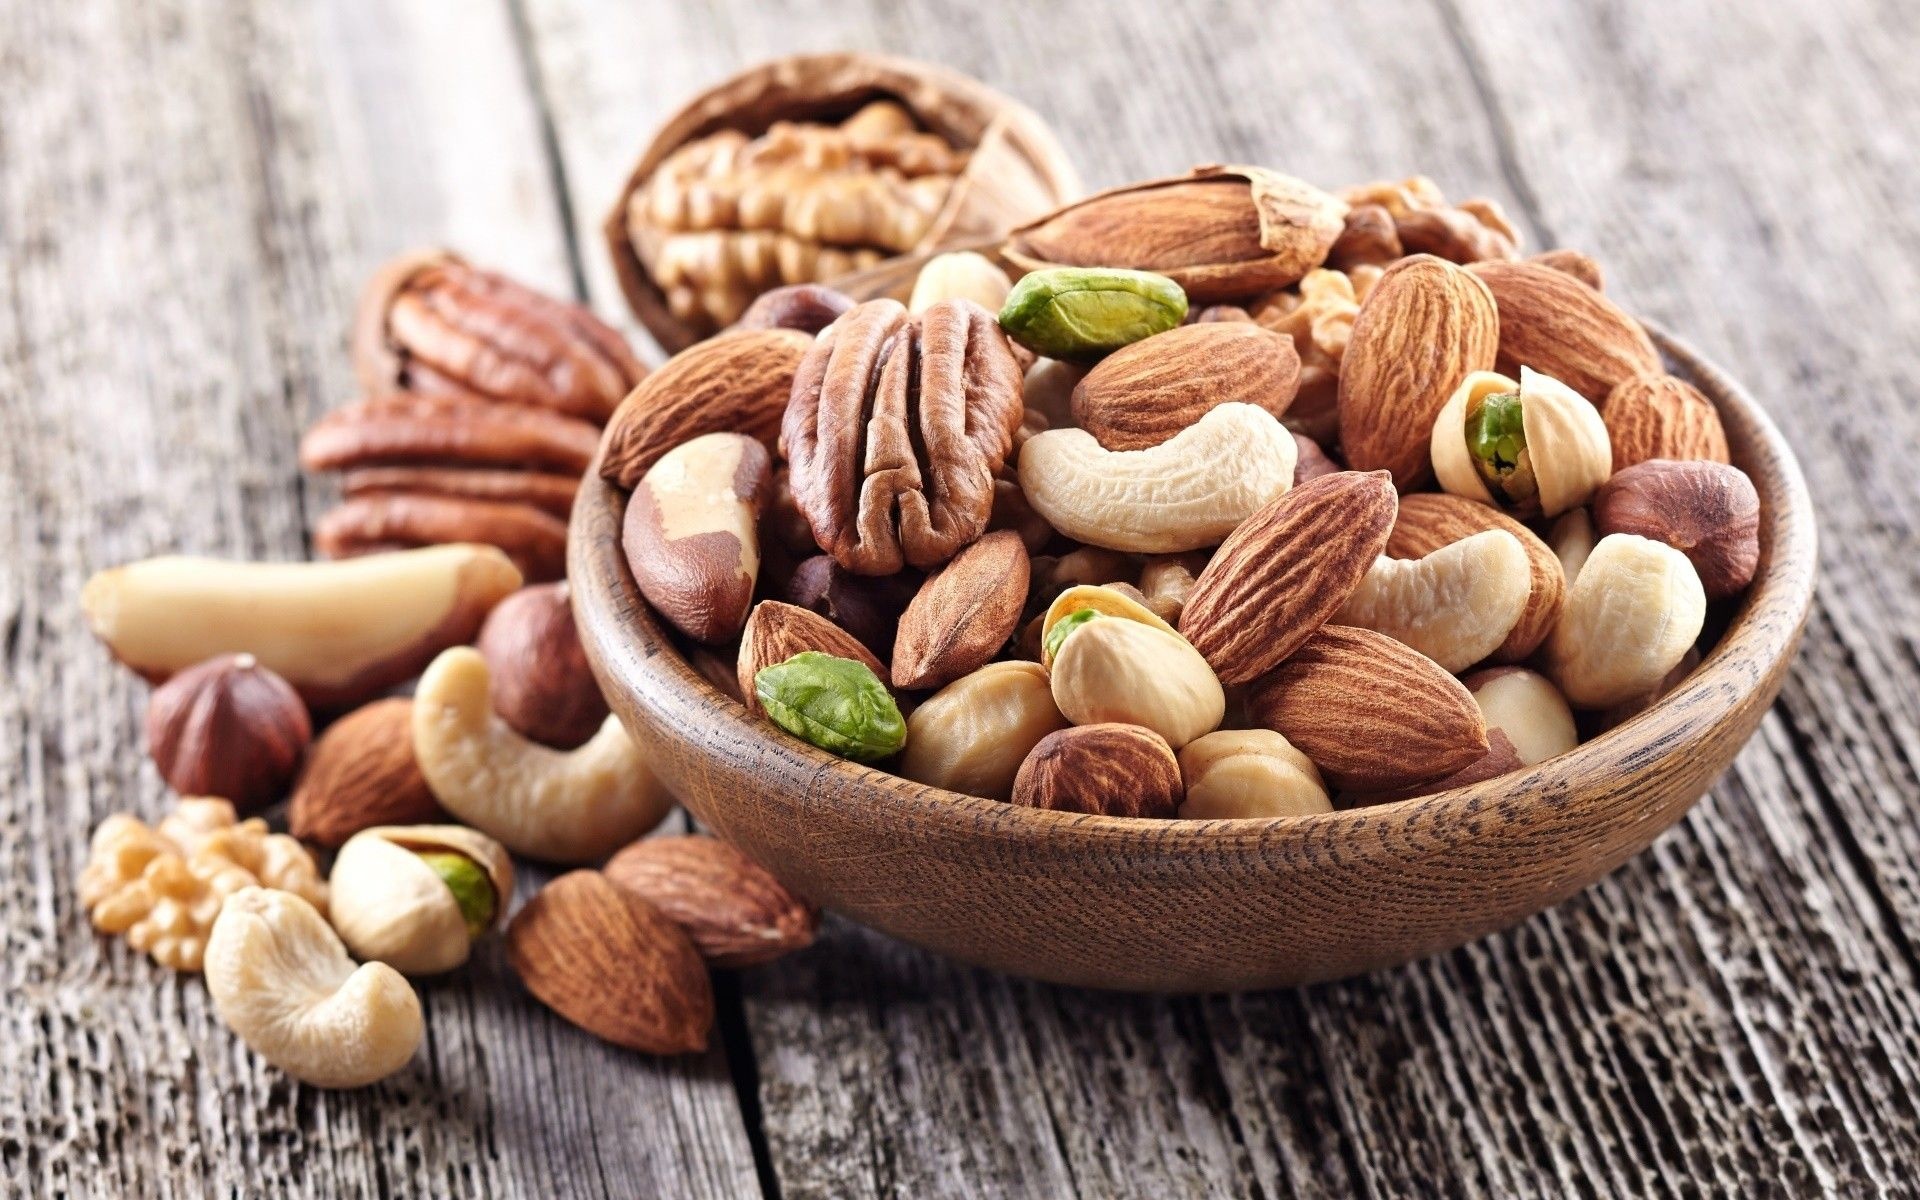 Pecans: An edible nut of hickory tree, used as a snack and in various recipes. 1920x1200 HD Wallpaper.